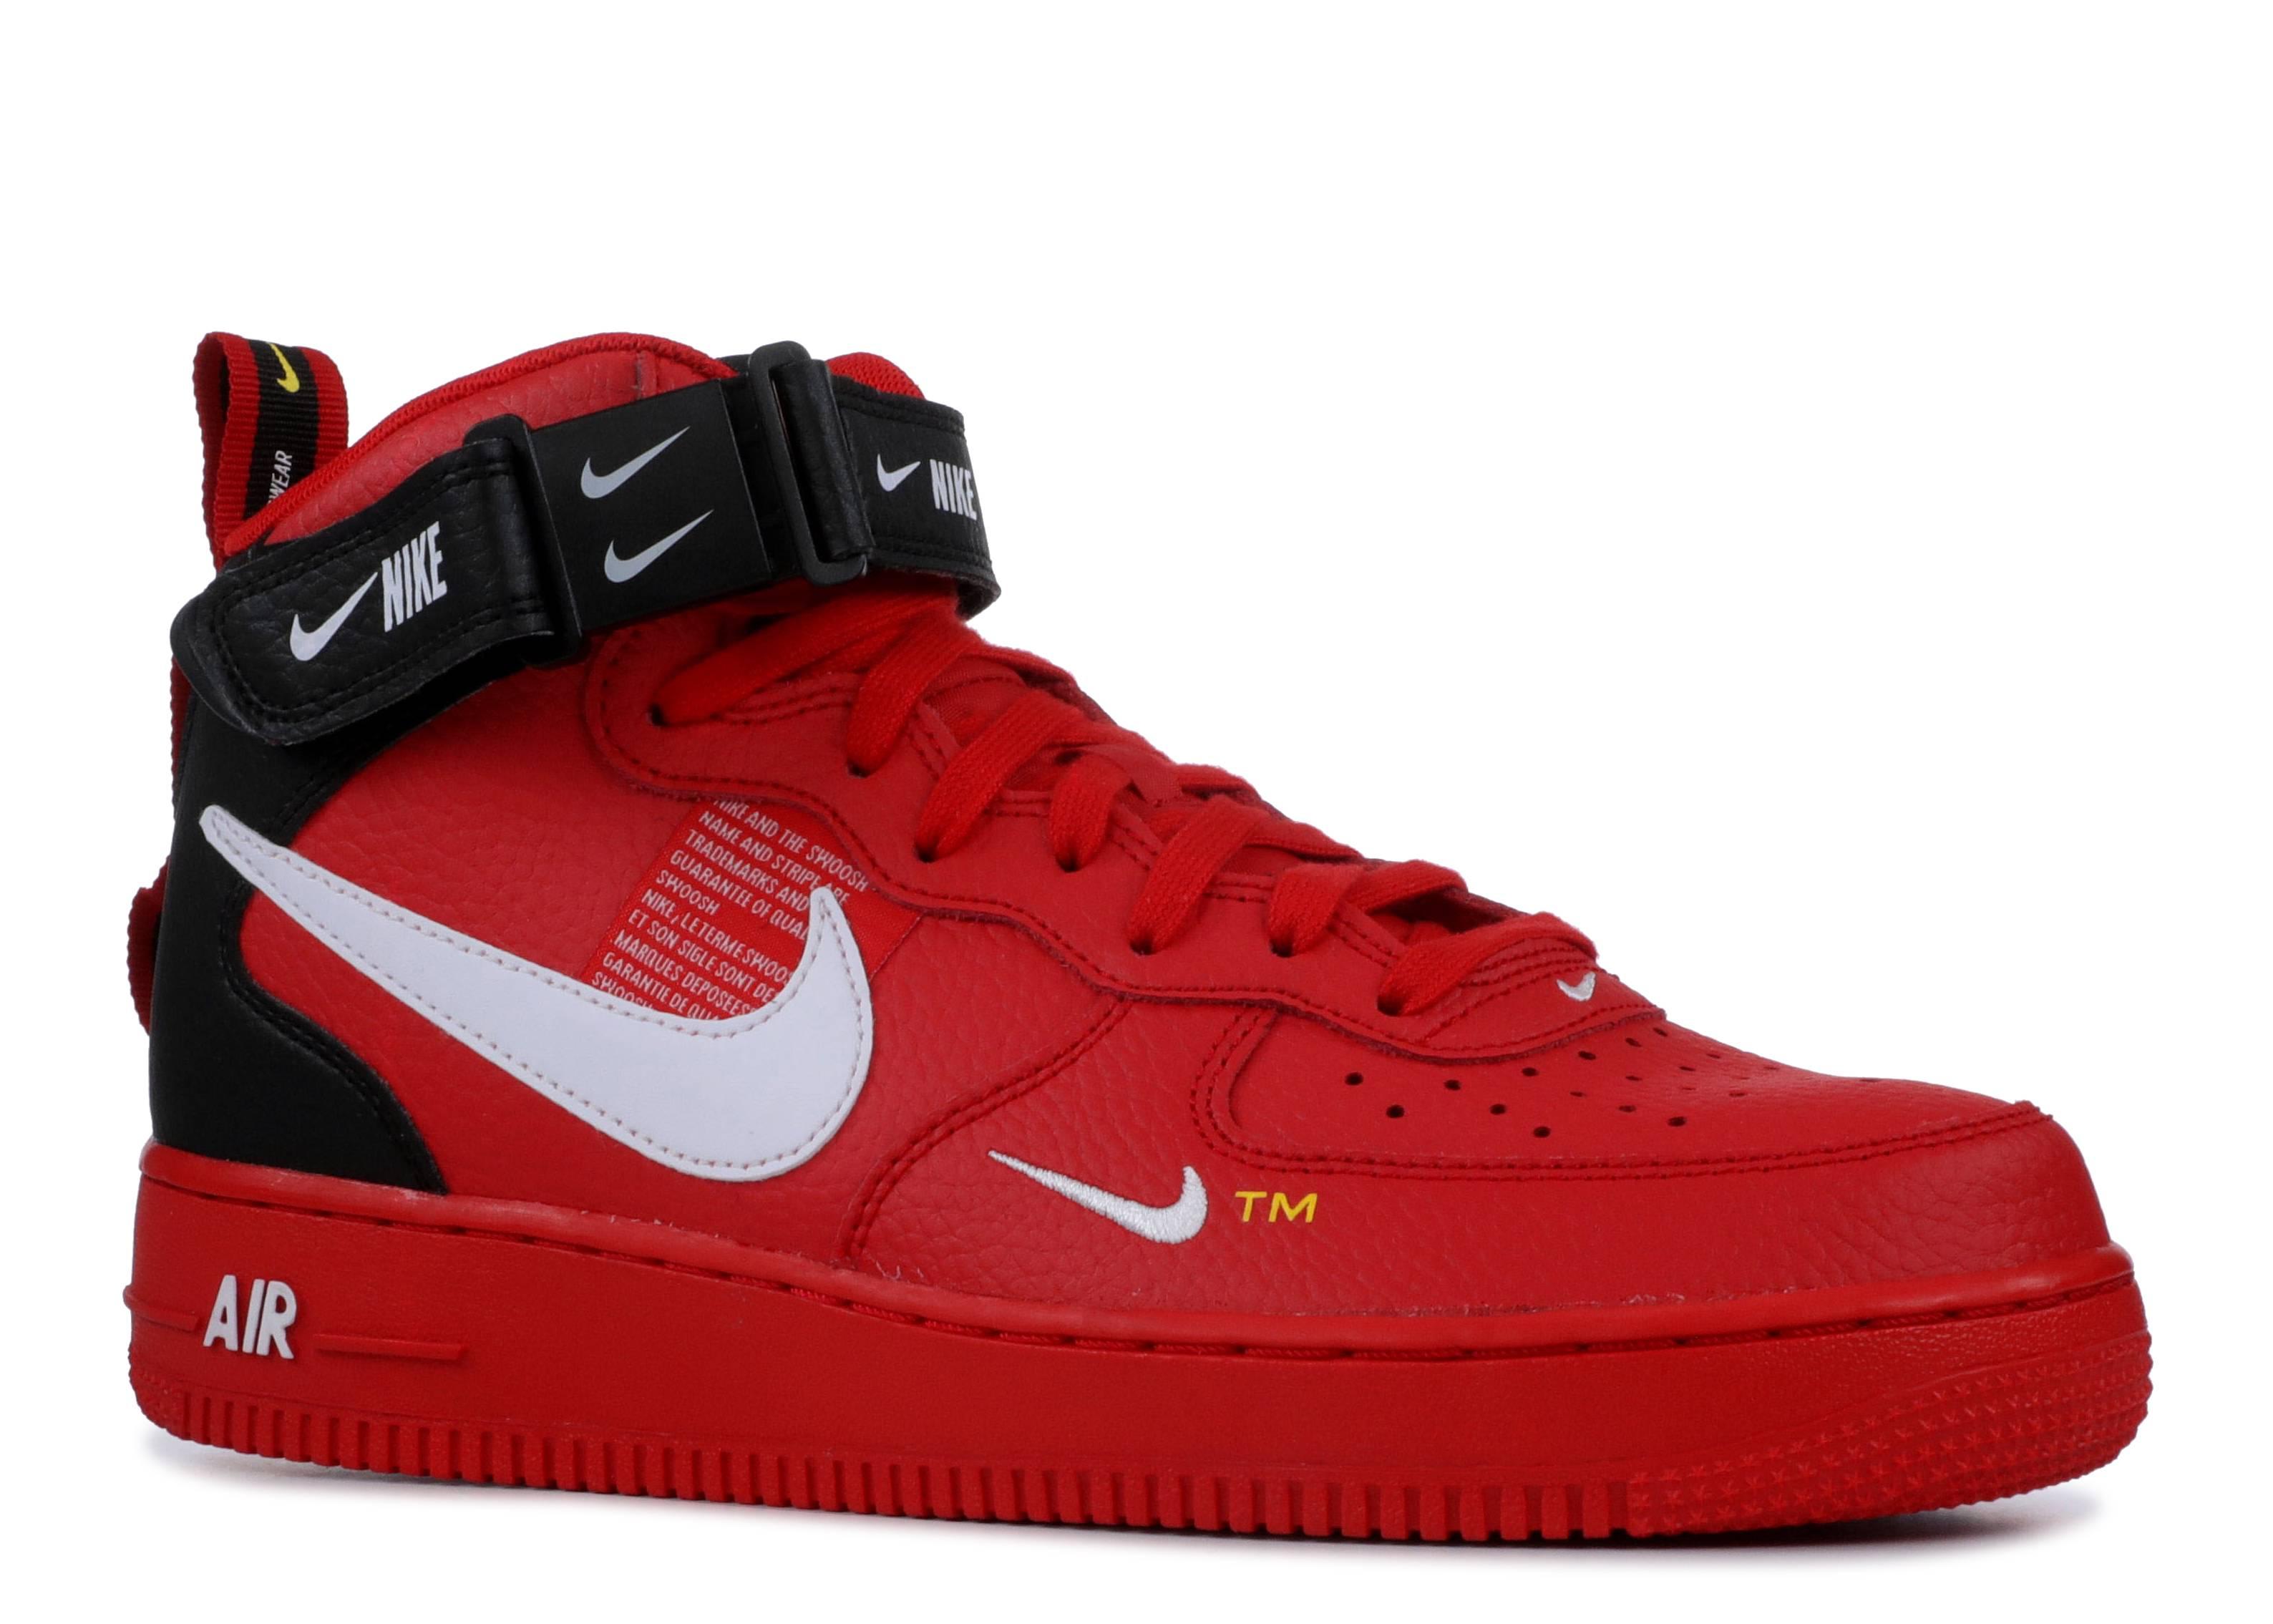 Nike Air Force 1 Mid 07 Lv8 in Red 